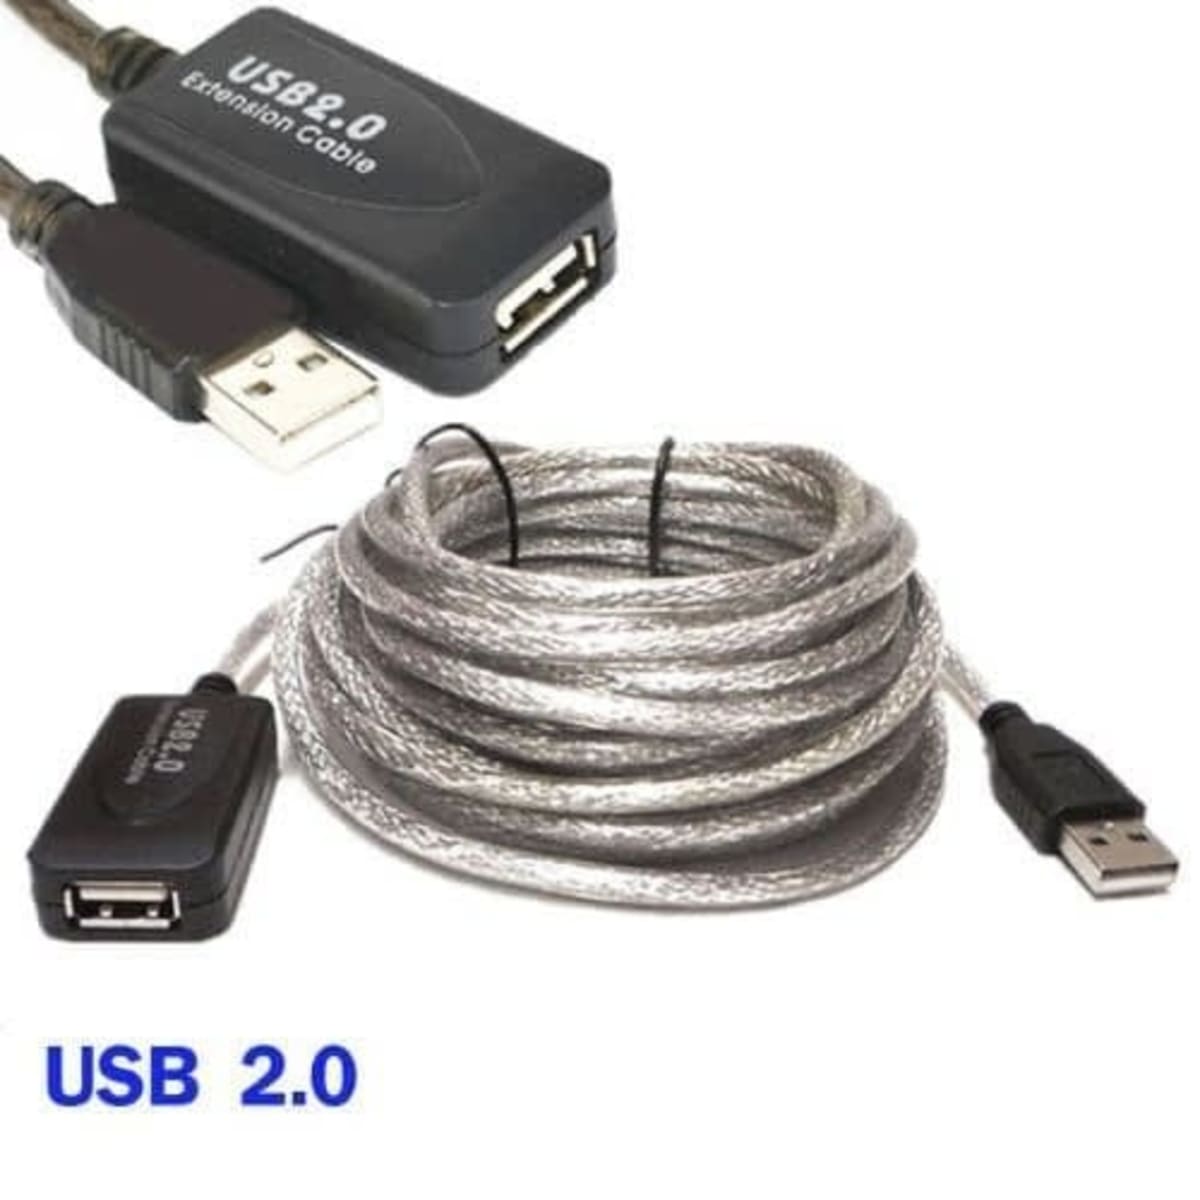 Usb 2.0 Extension Cable-20m | Konga Online